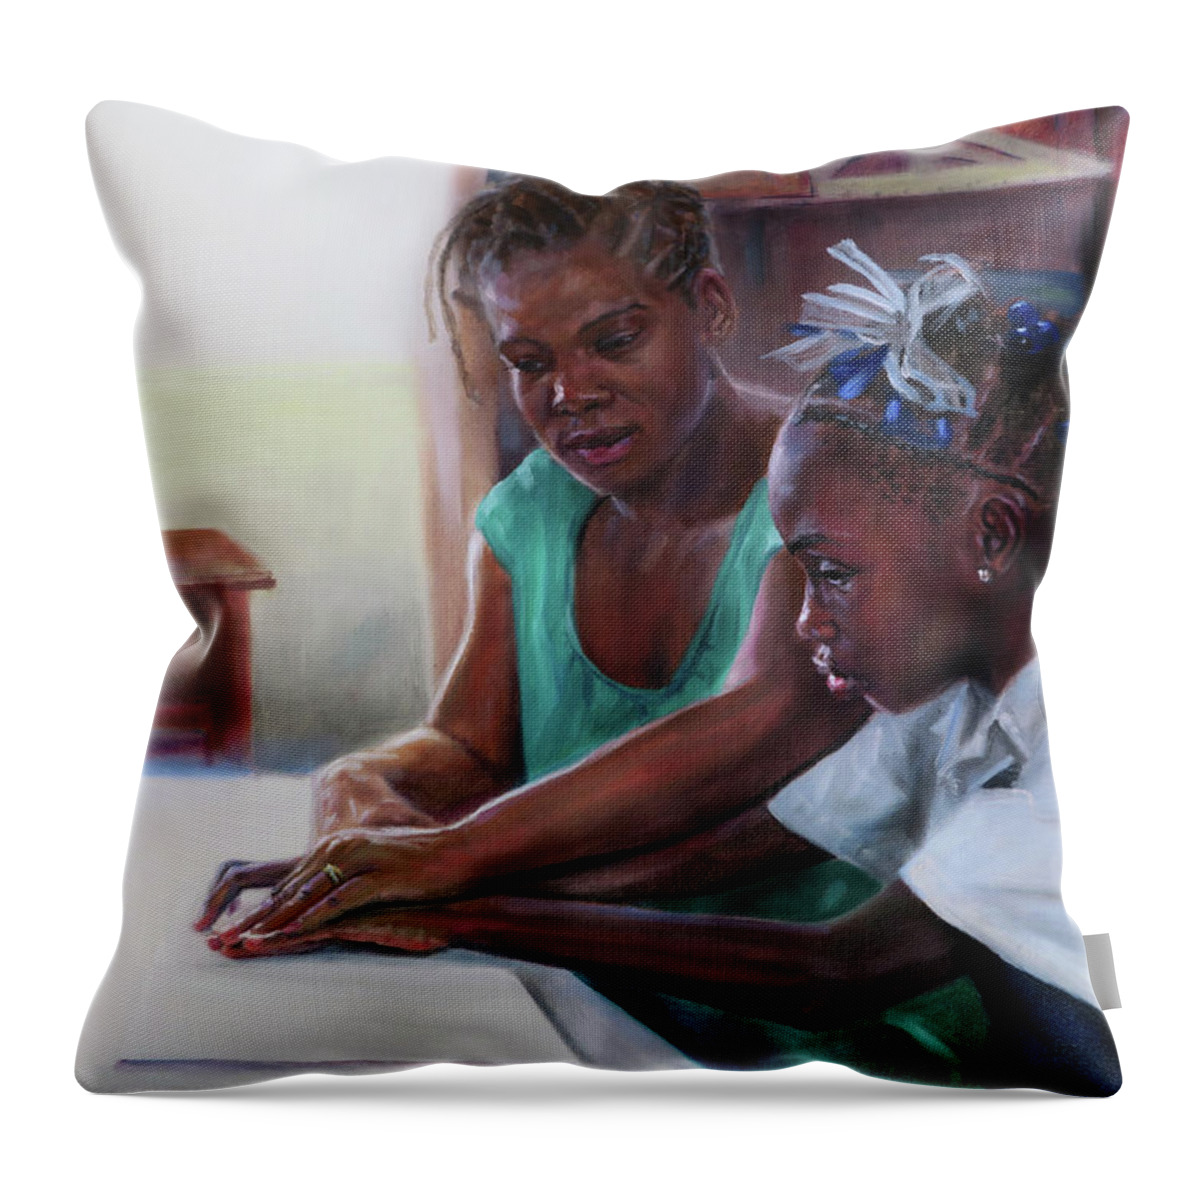 Braille Throw Pillow featuring the painting Learning Braille 2 by Jonathan Gladding